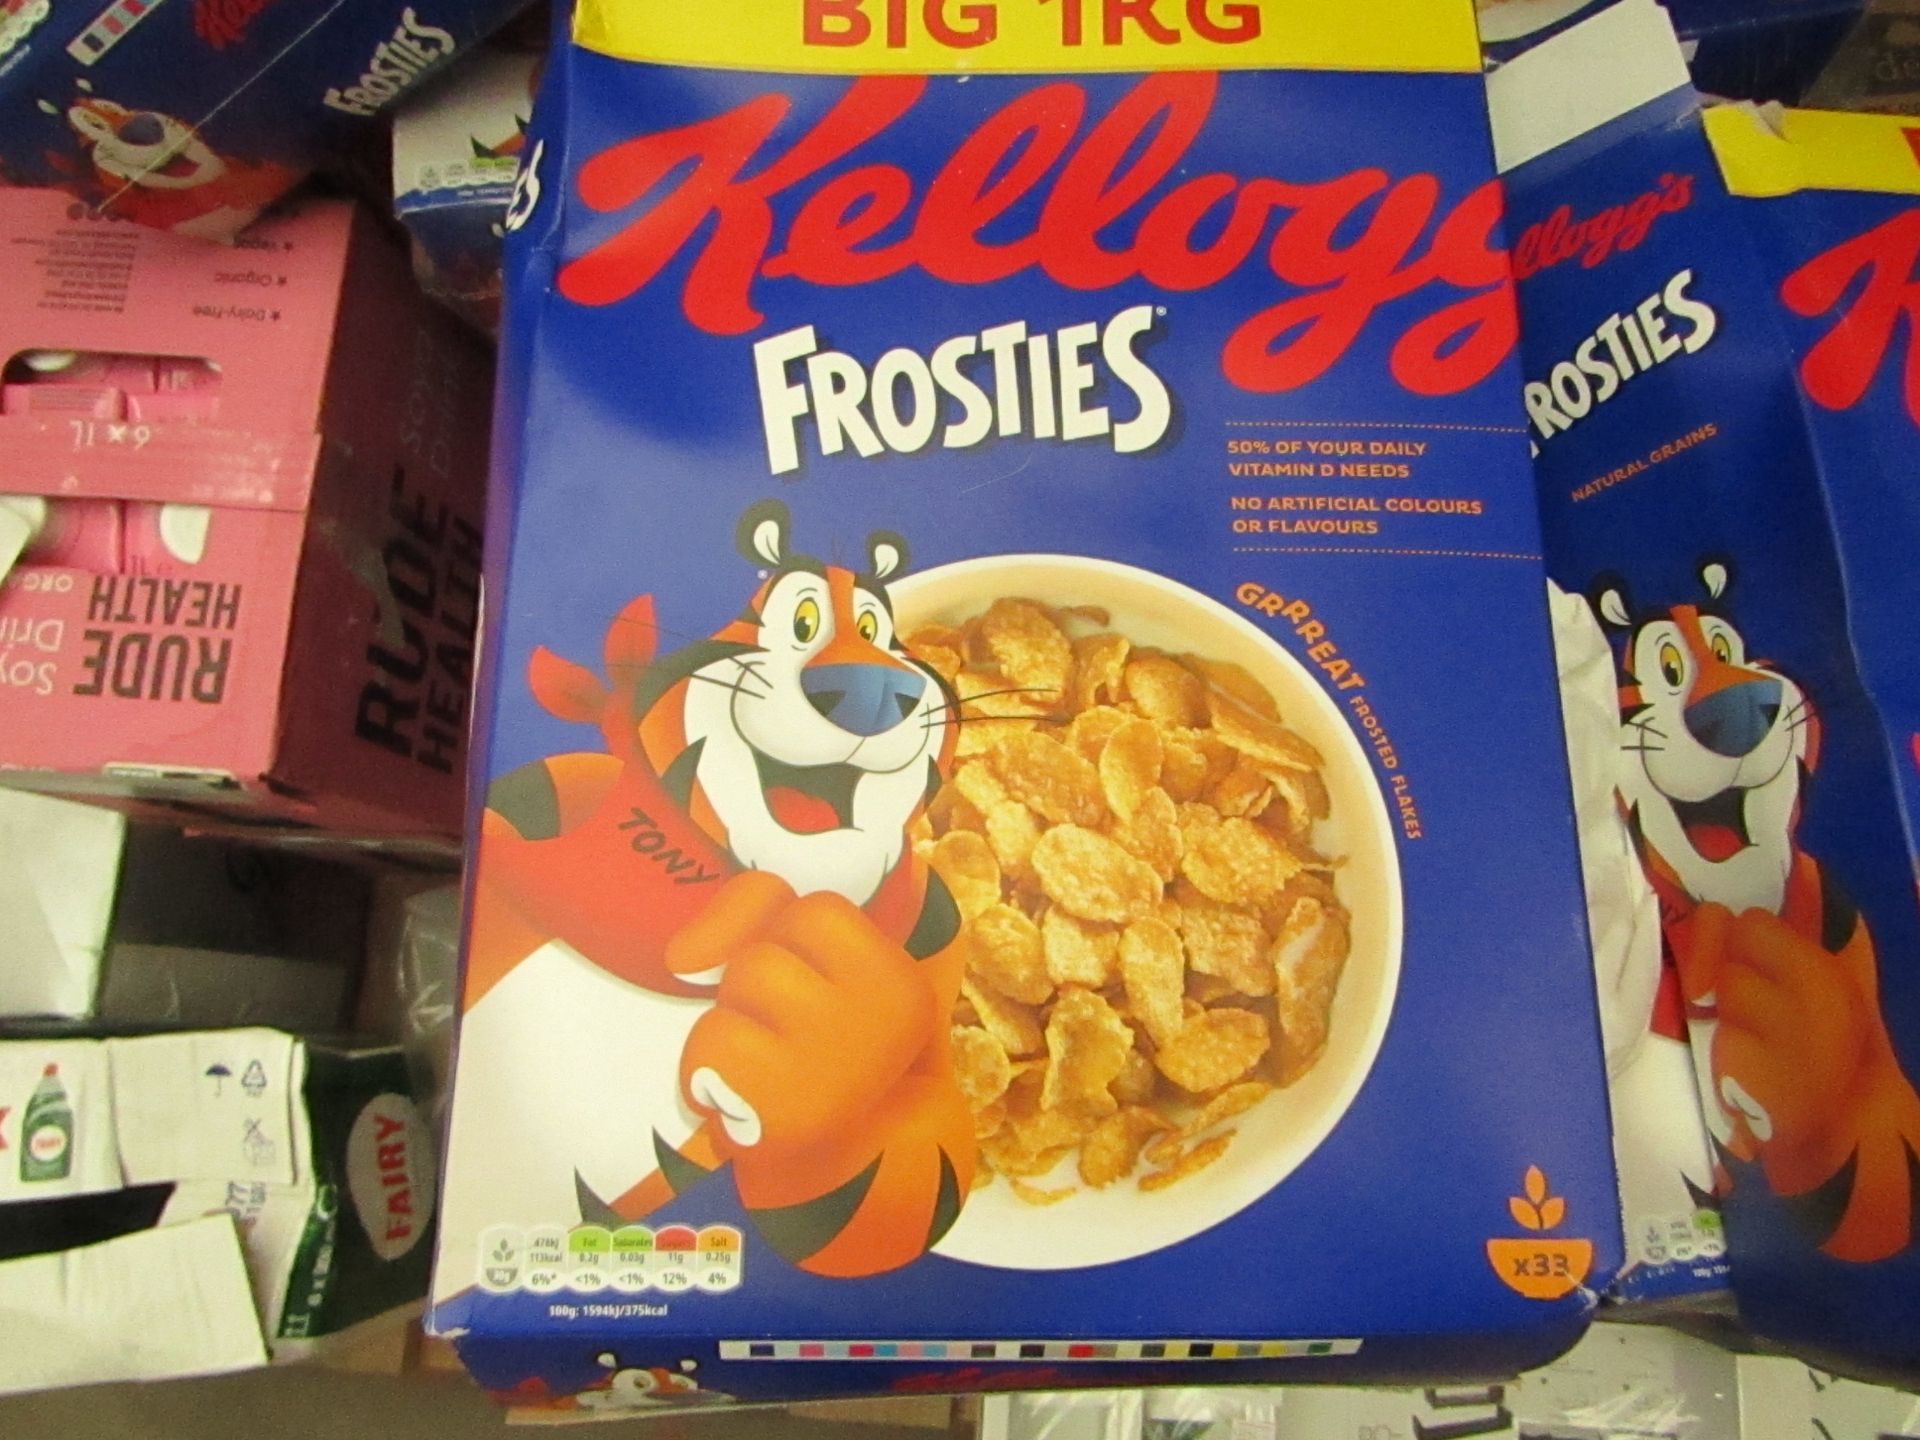 2x Kelloggs - Frosties Cereal - Big 1kg Pack - BBE 19/06/21 - Box Damage, But Content Fine.